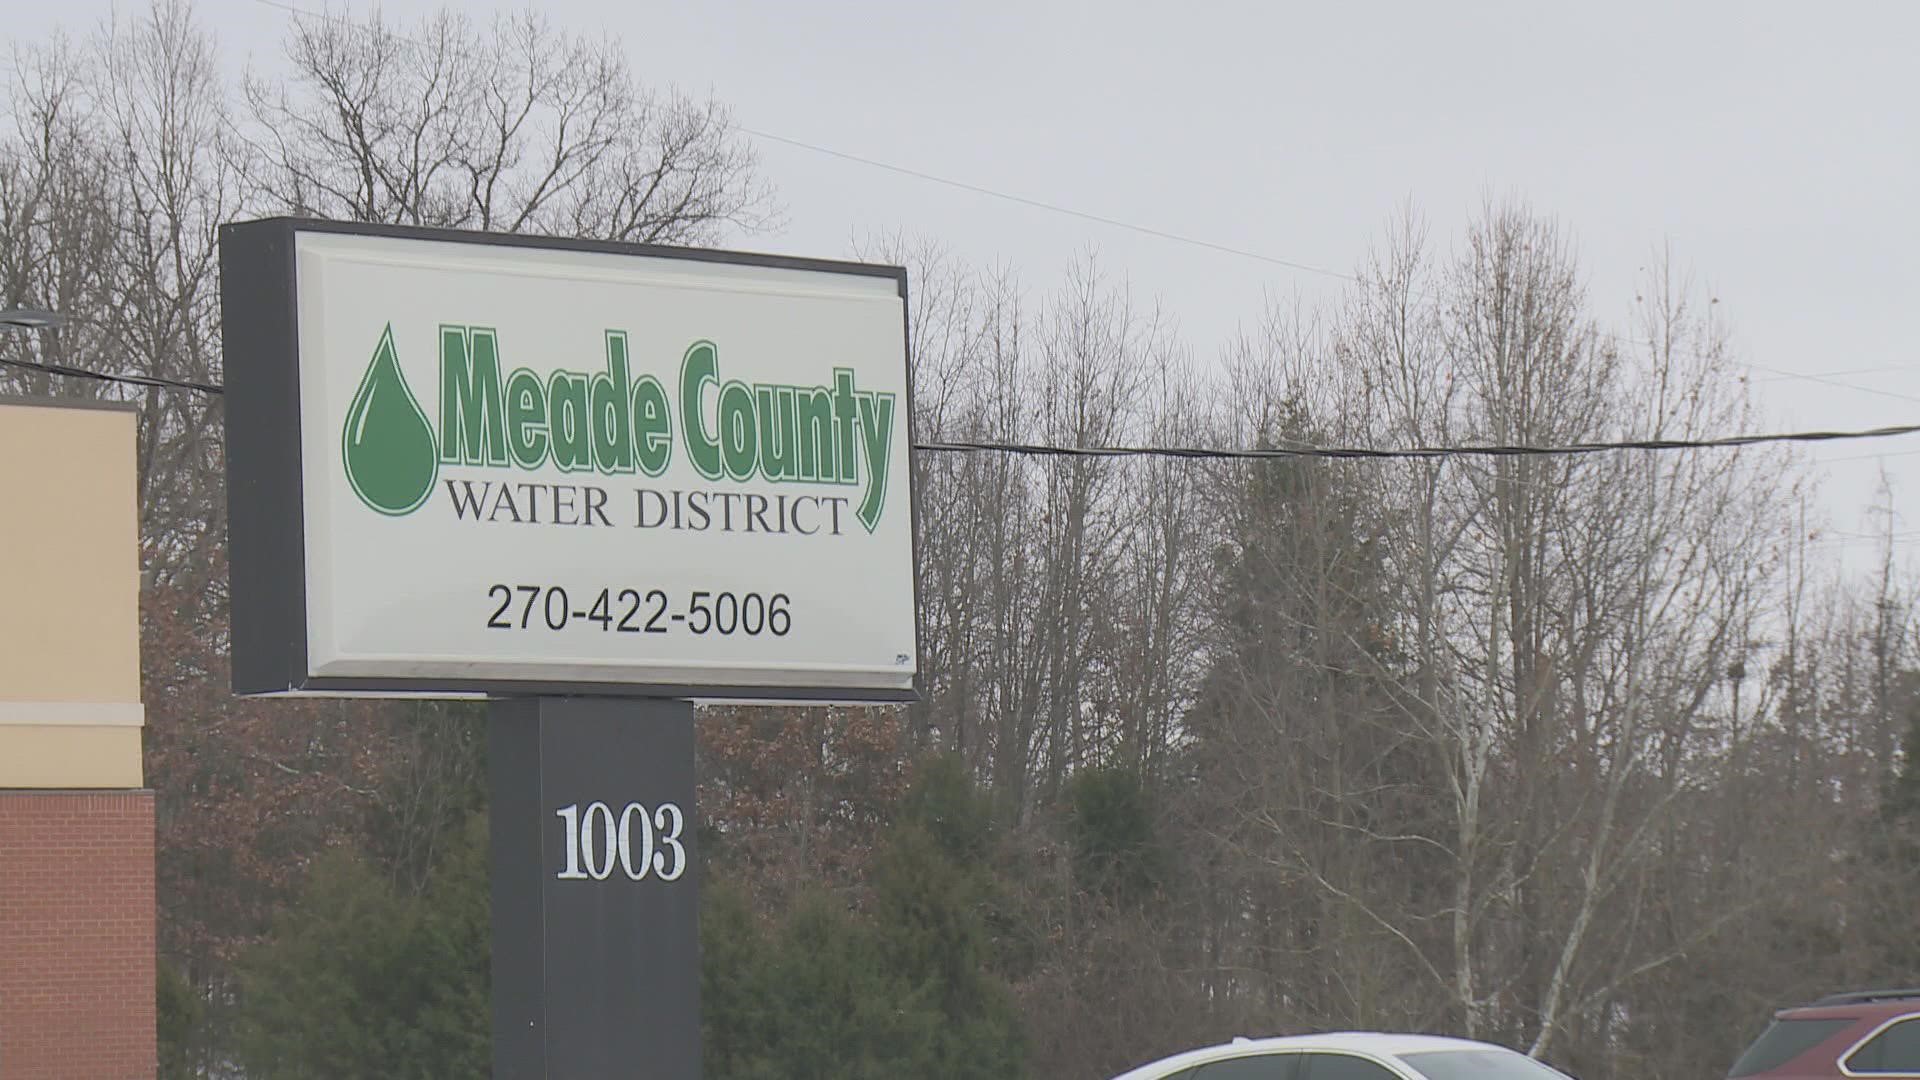 About 1,000 people in rural Meade County have been without running water for over a day now.